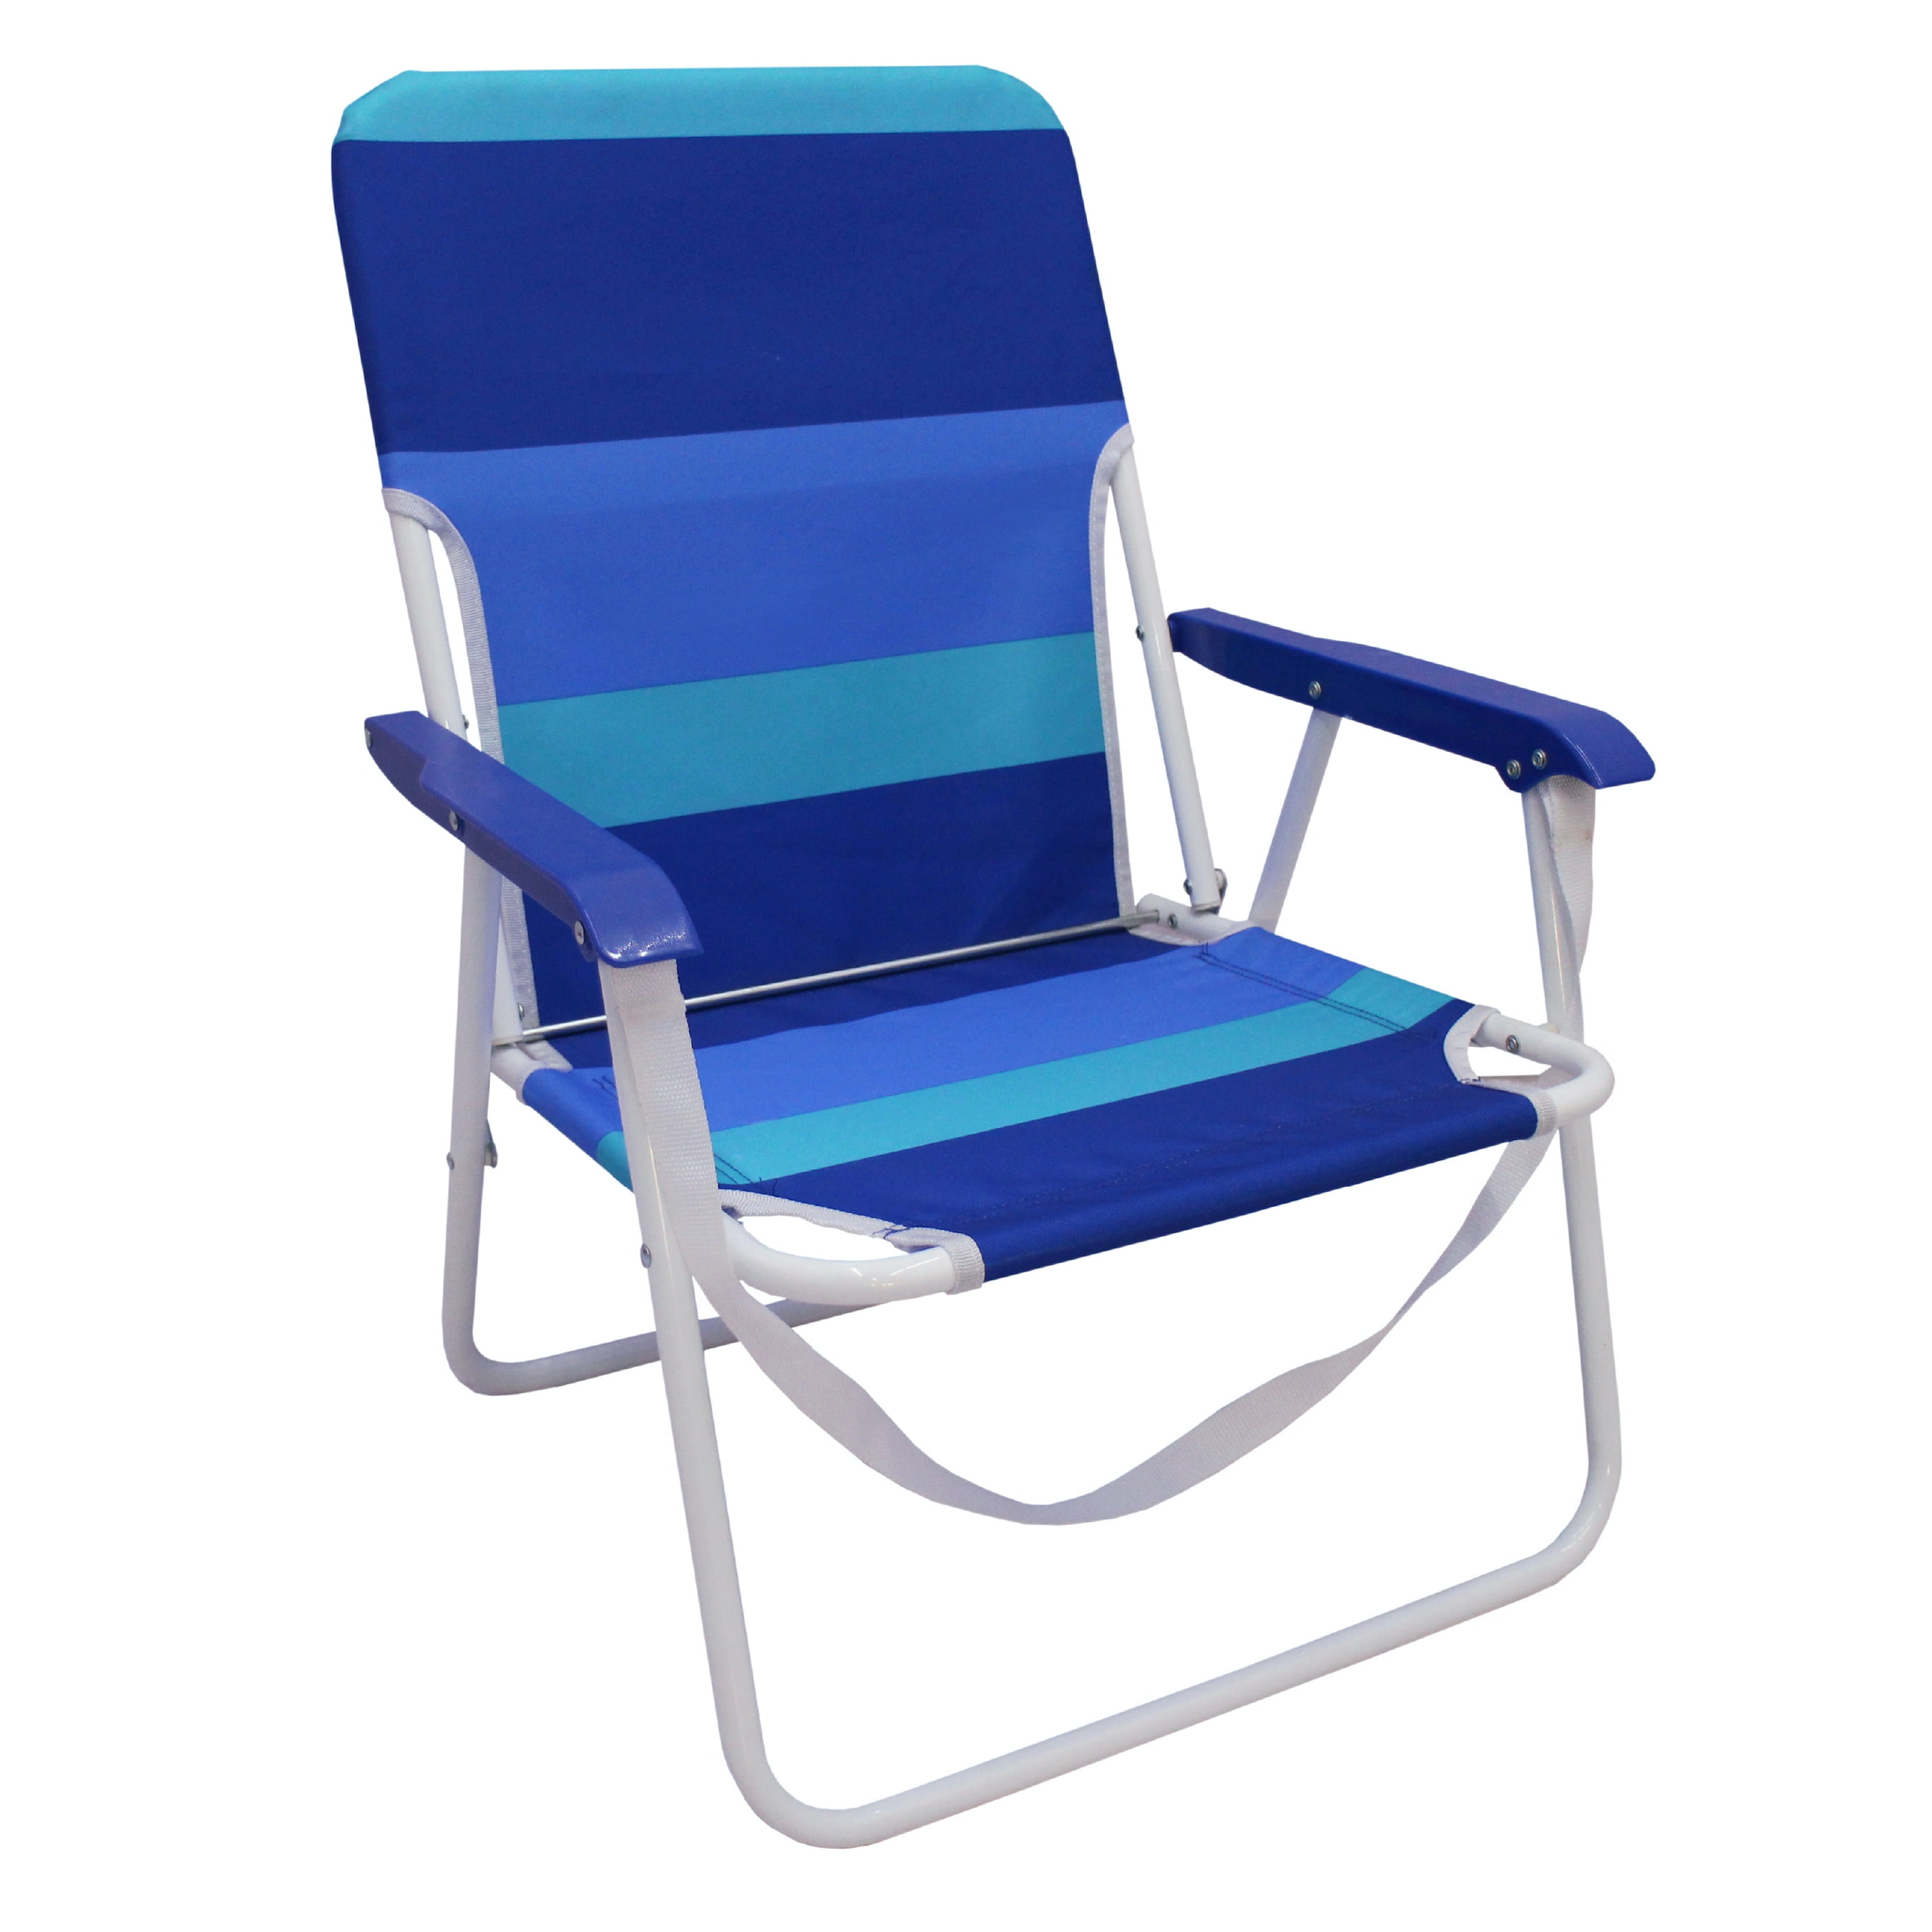 Creatice Beach Chair Blue for Large Space